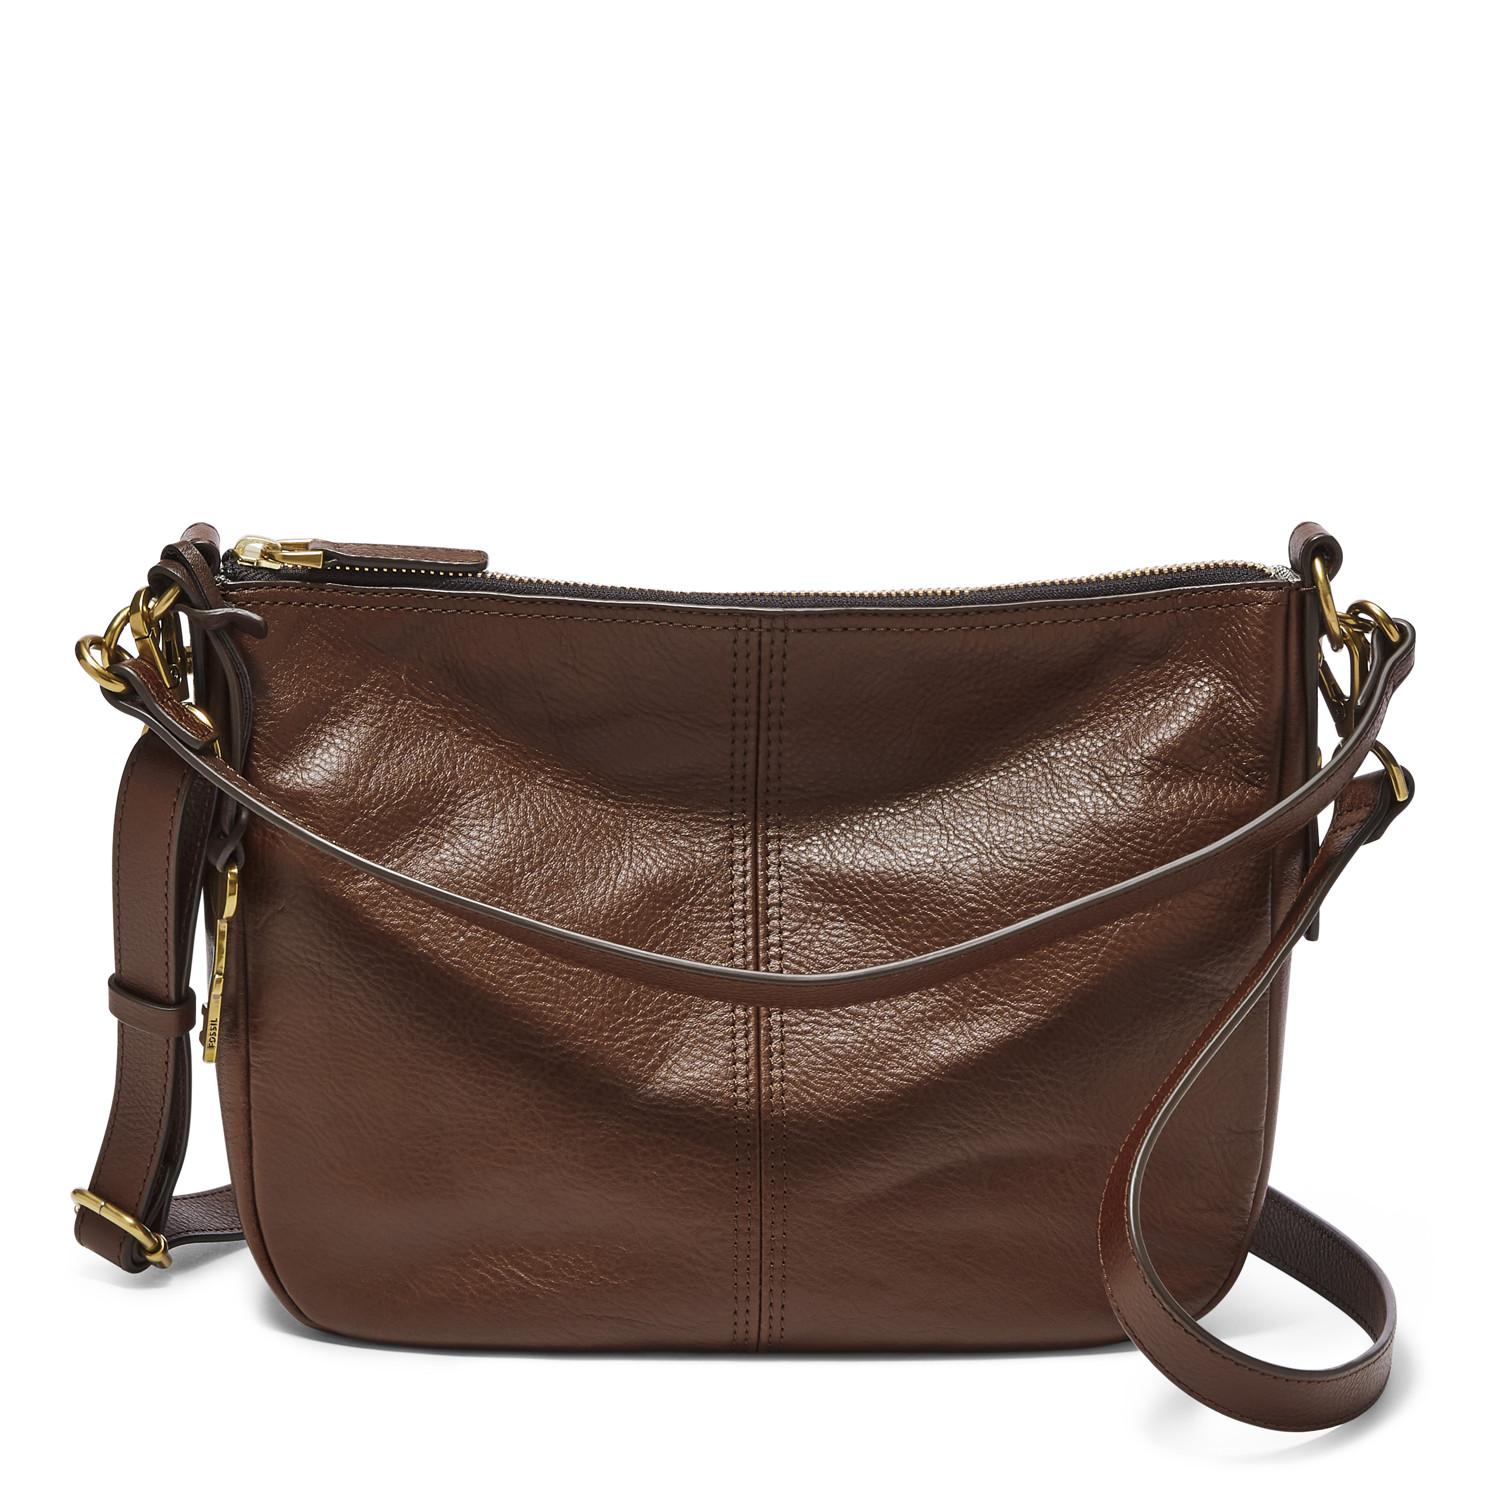 Fossil Leather Jolie Crossbody in Brown - Lyst